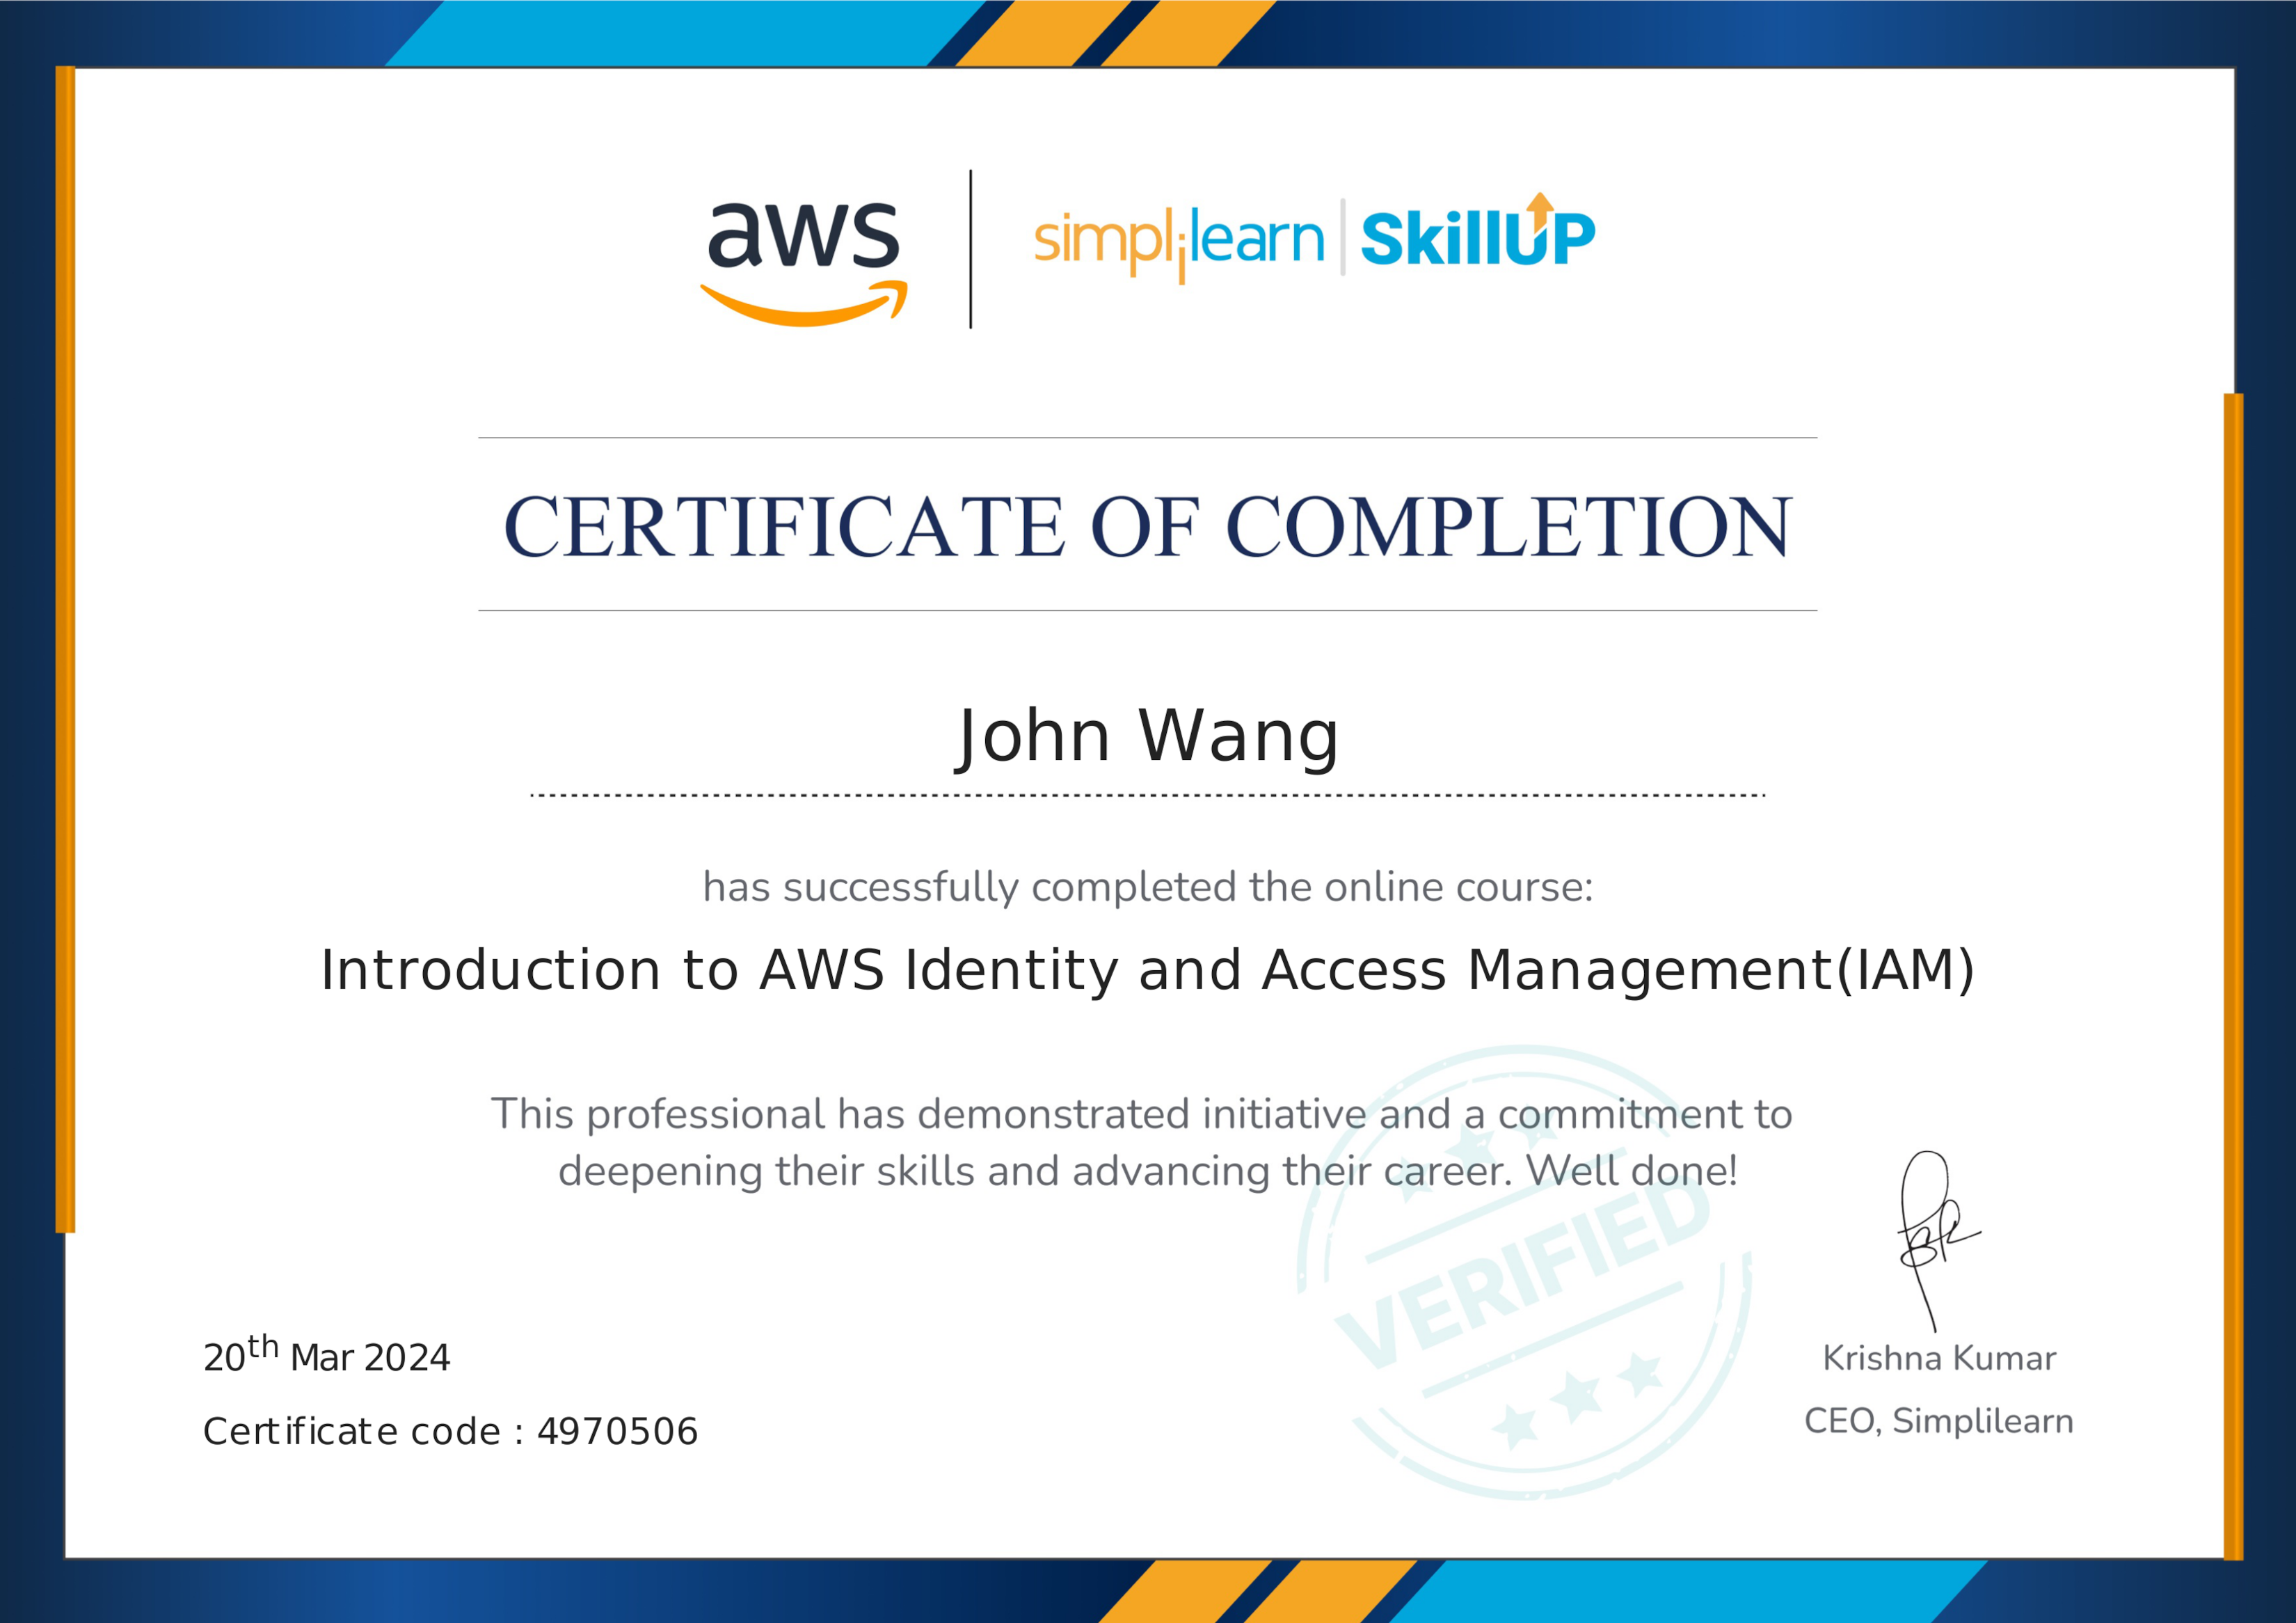 John's Introduction to AWS Identity and Access Management (IAM) from Simplilearn